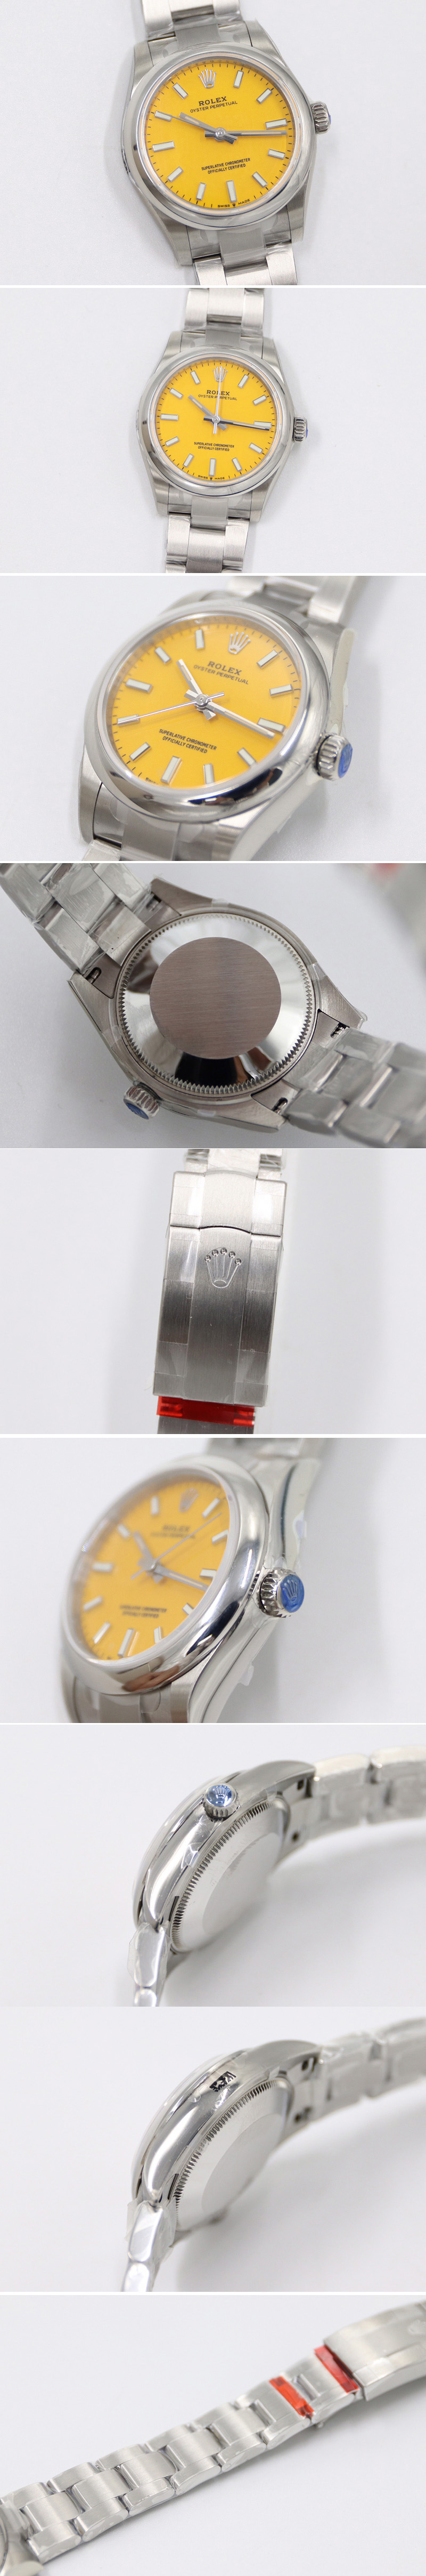 Replica Rolex Oyster Perpetual Watches